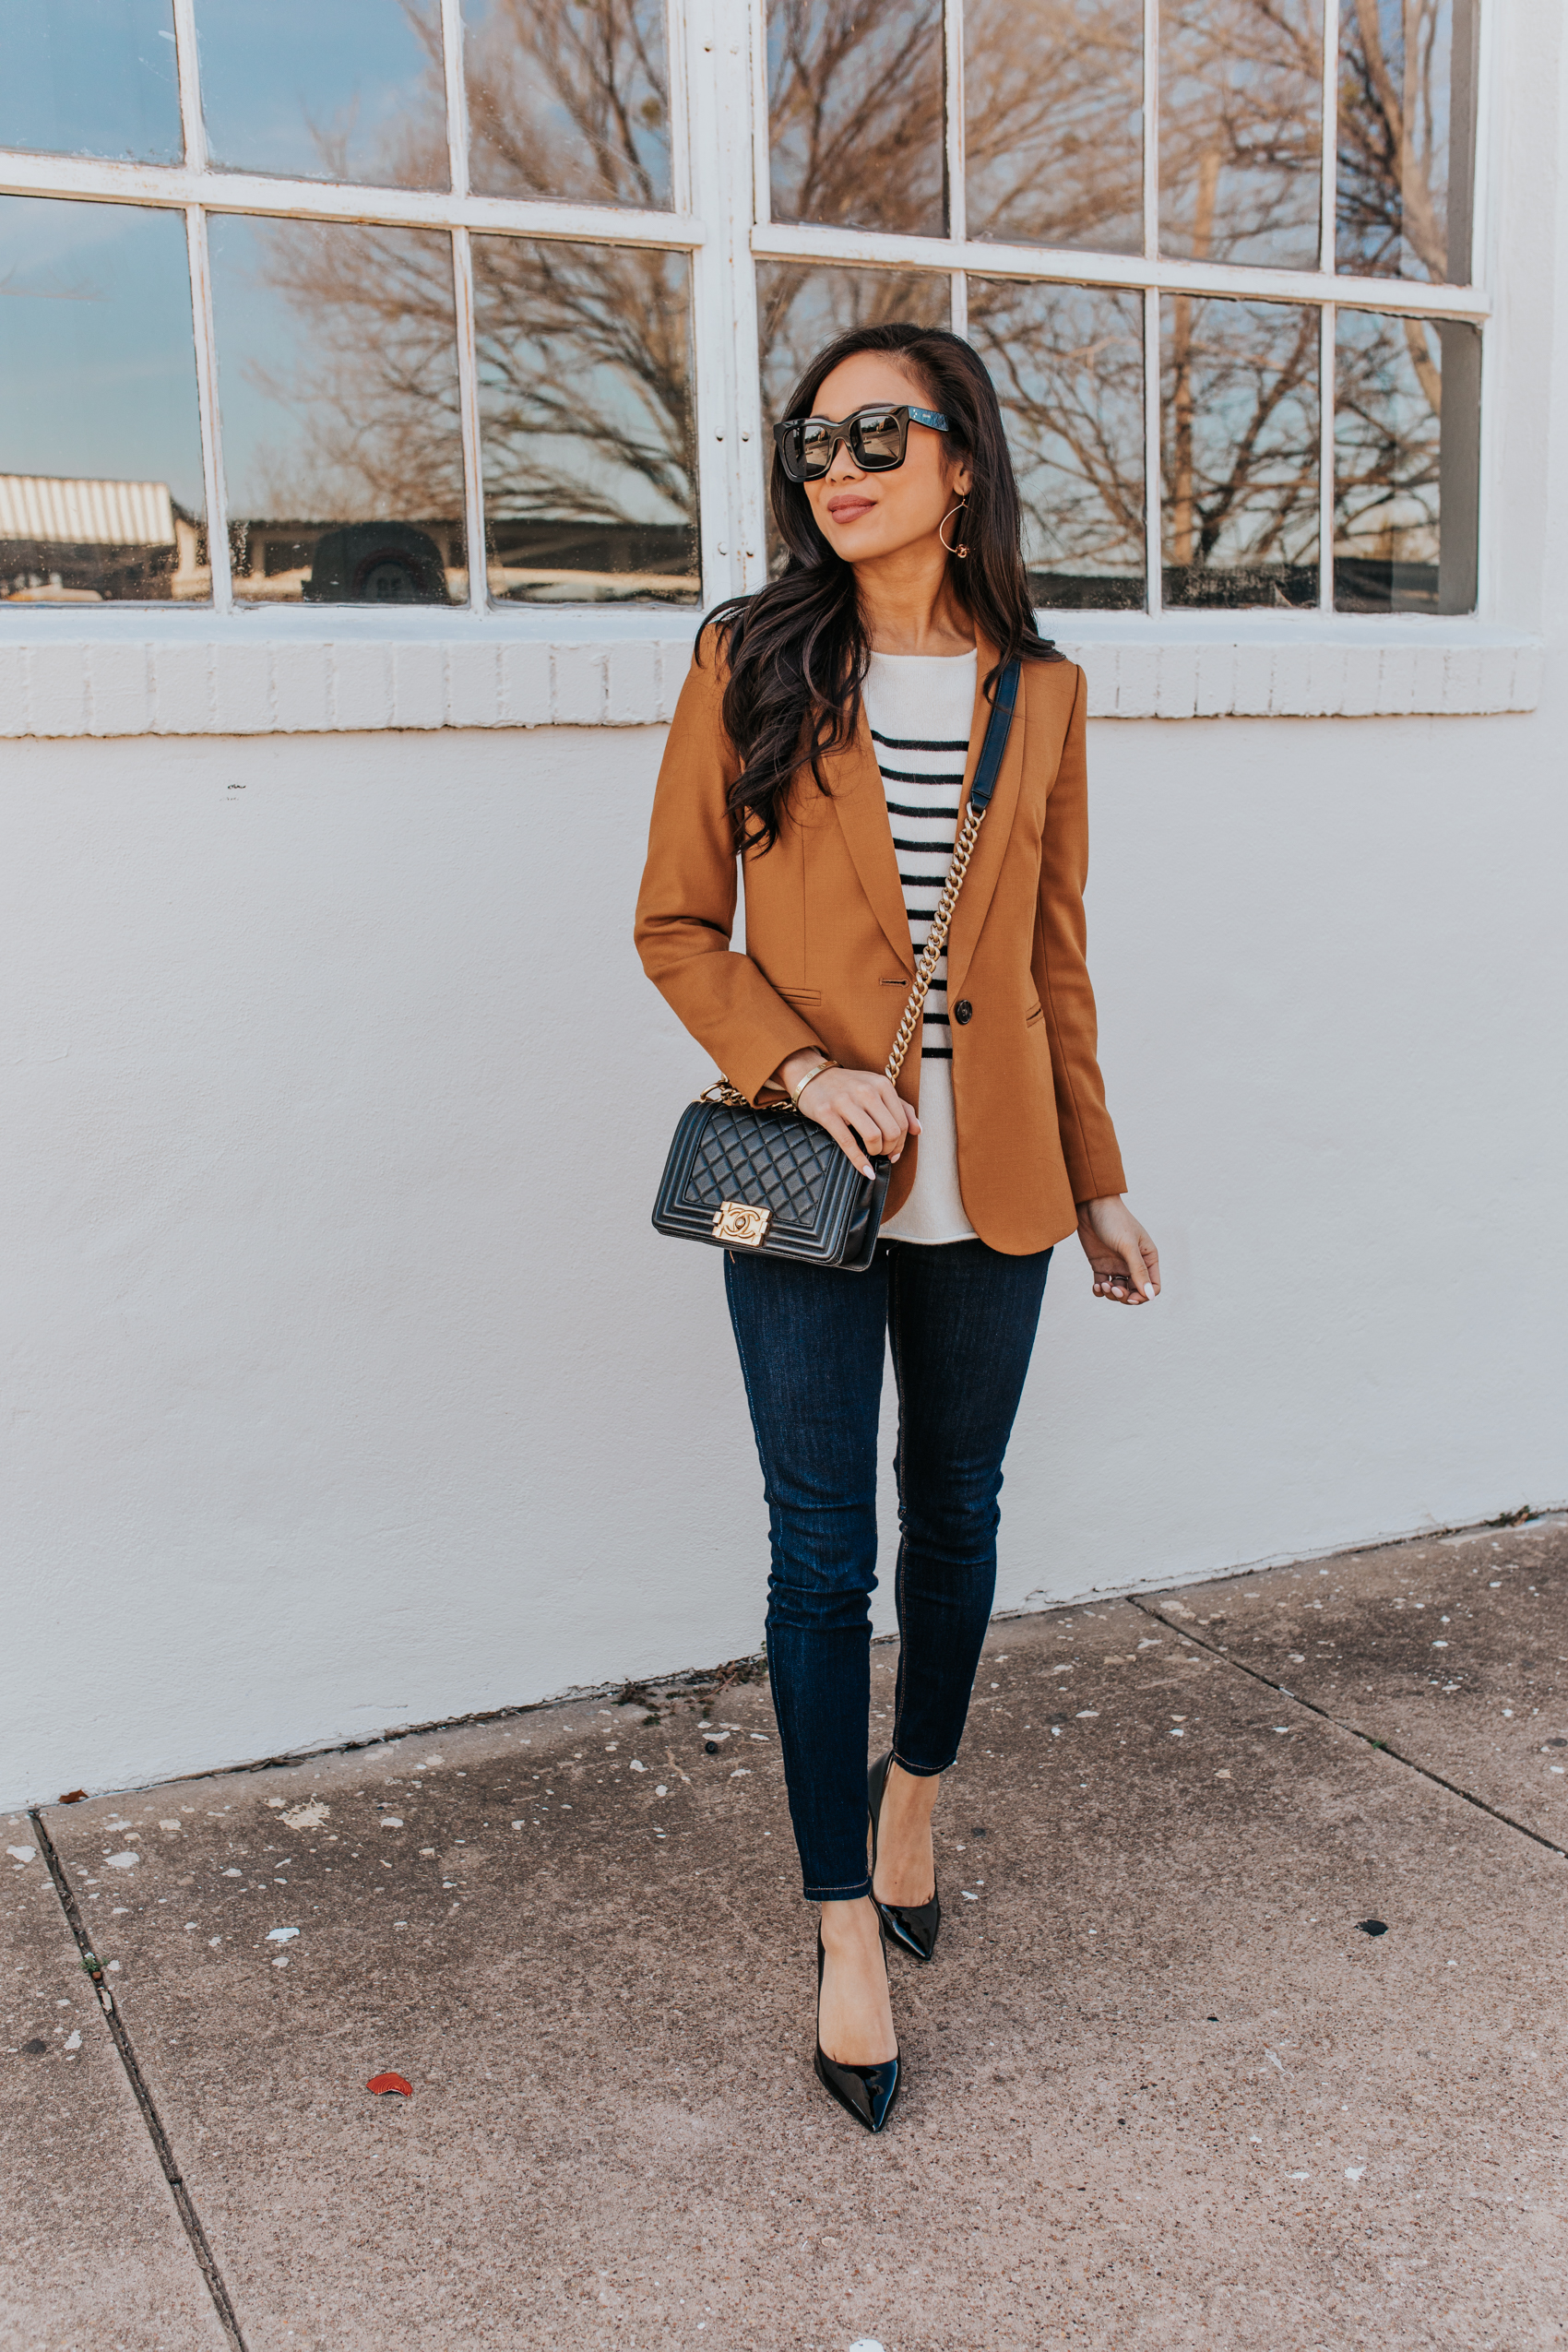 How to style a cashmere sweater for work by petite blogger Hoang-Kim